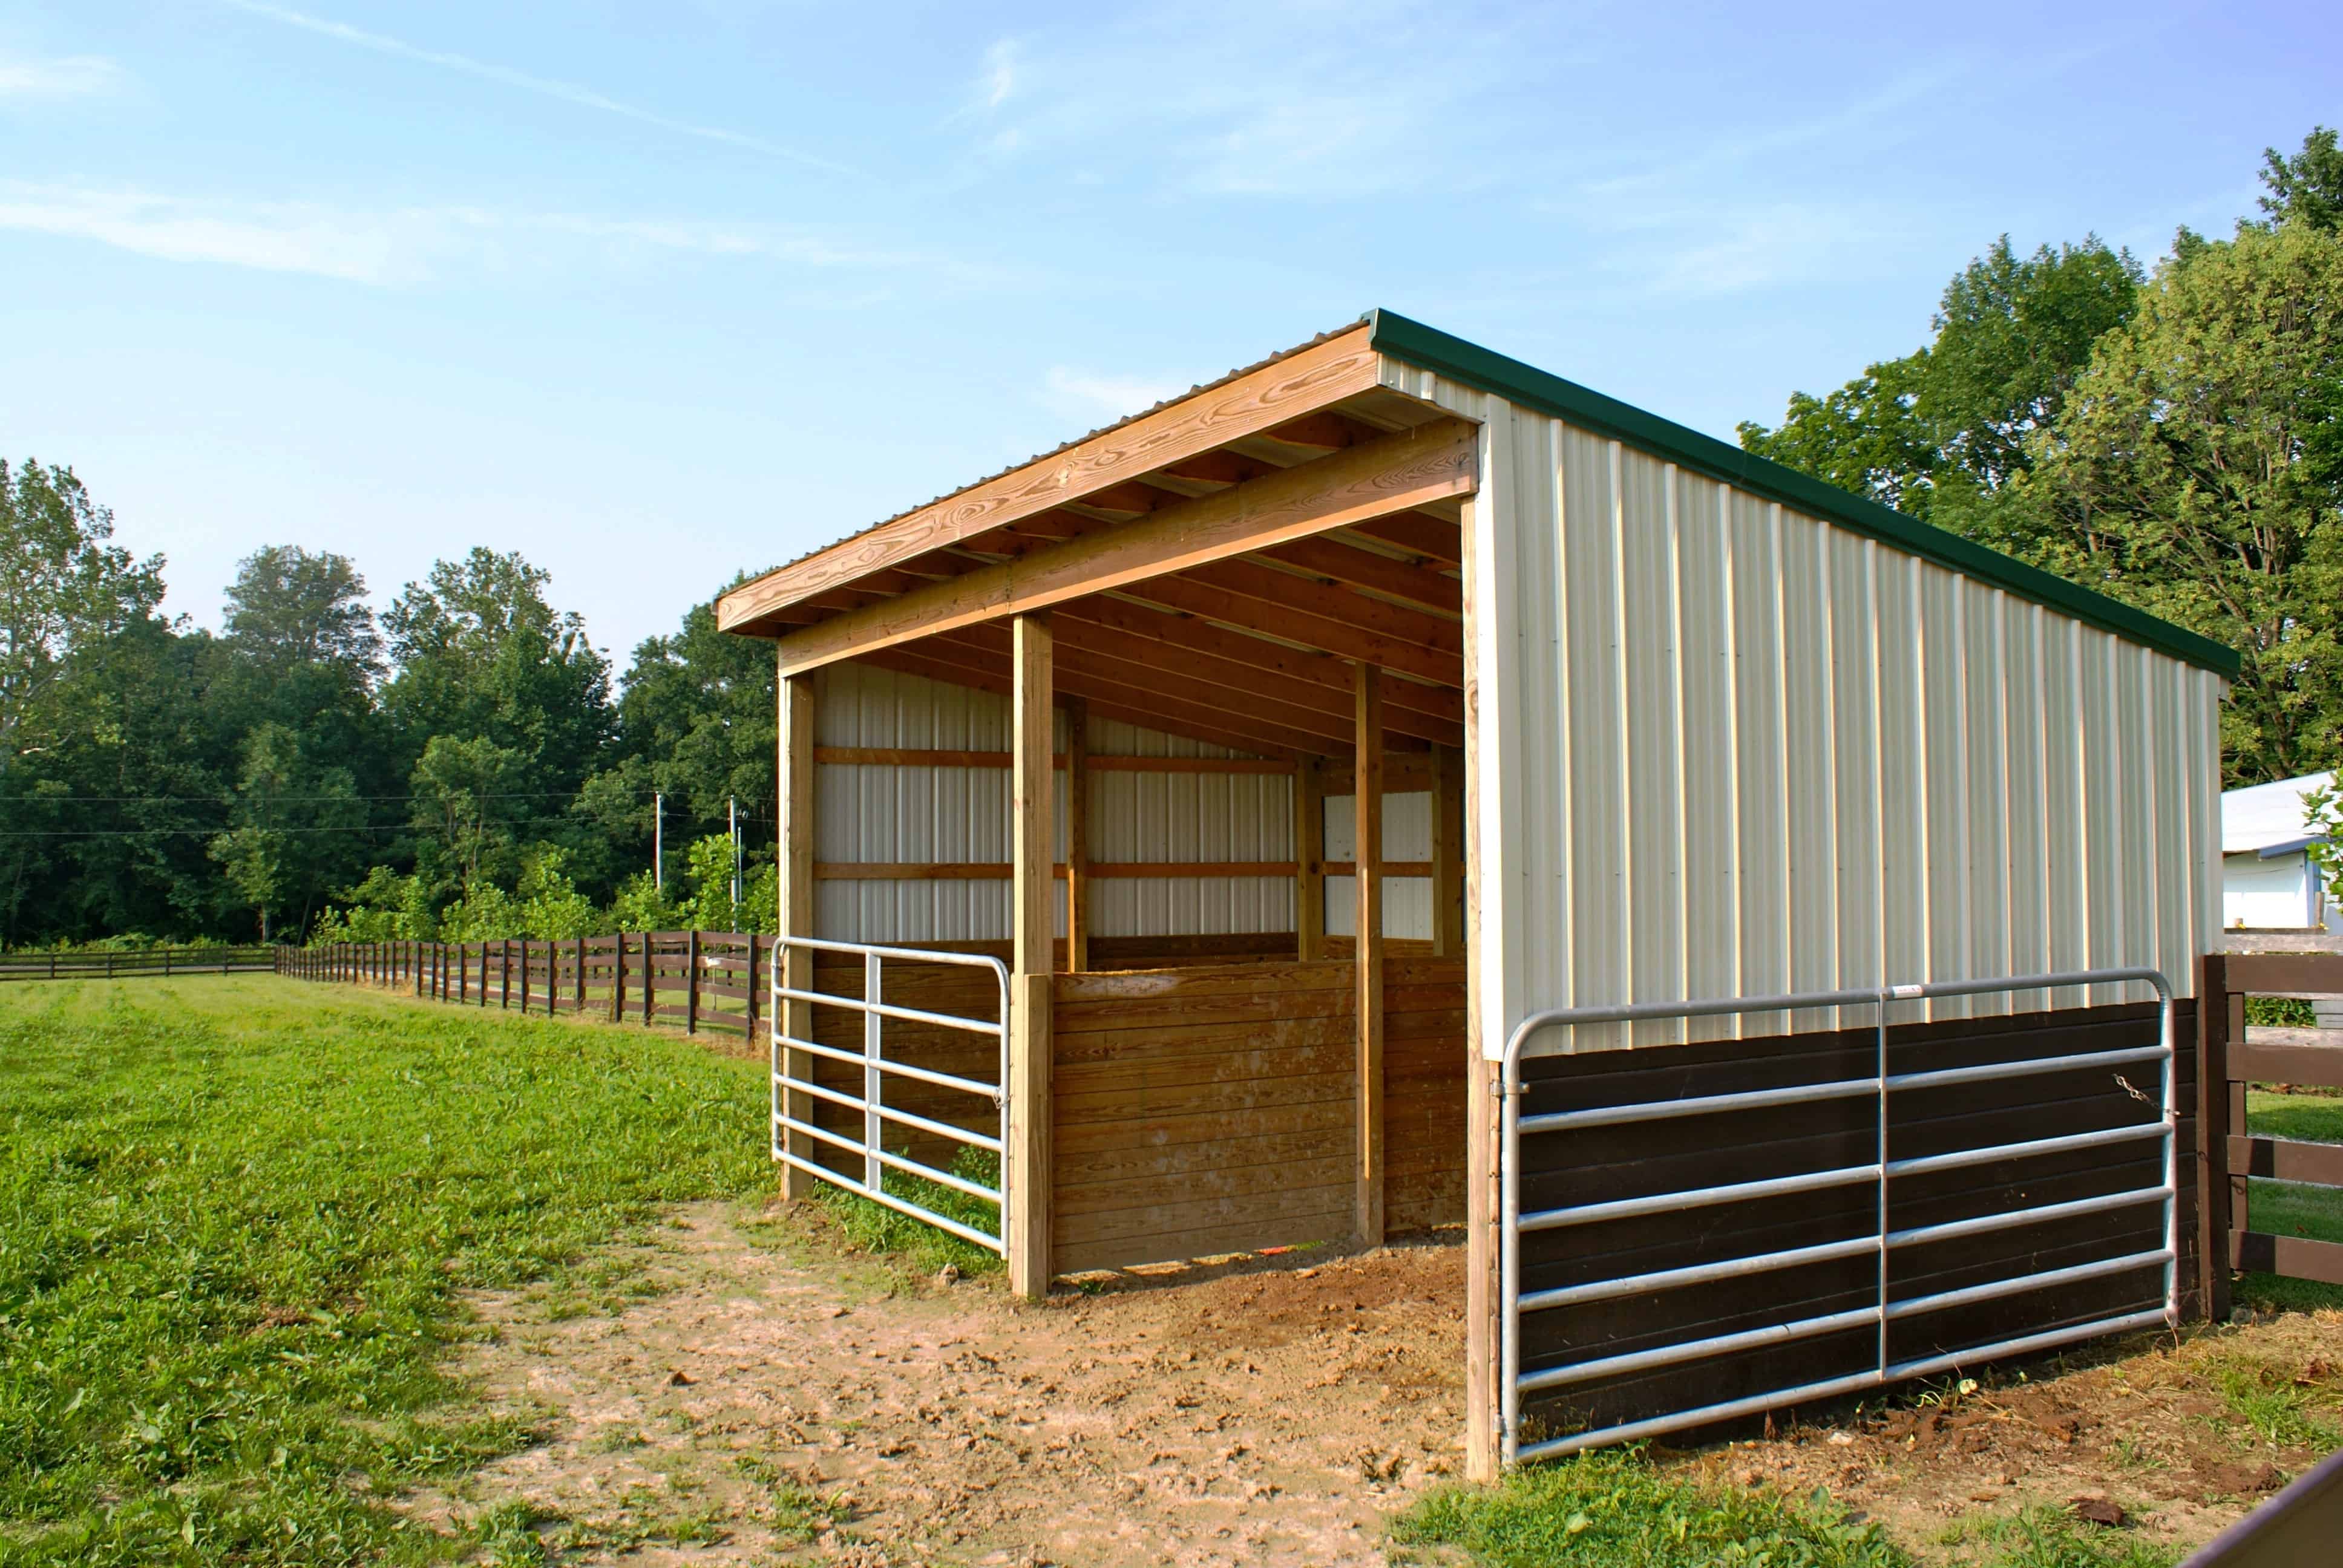 Plans for horse run in sheds, how to build shed plans